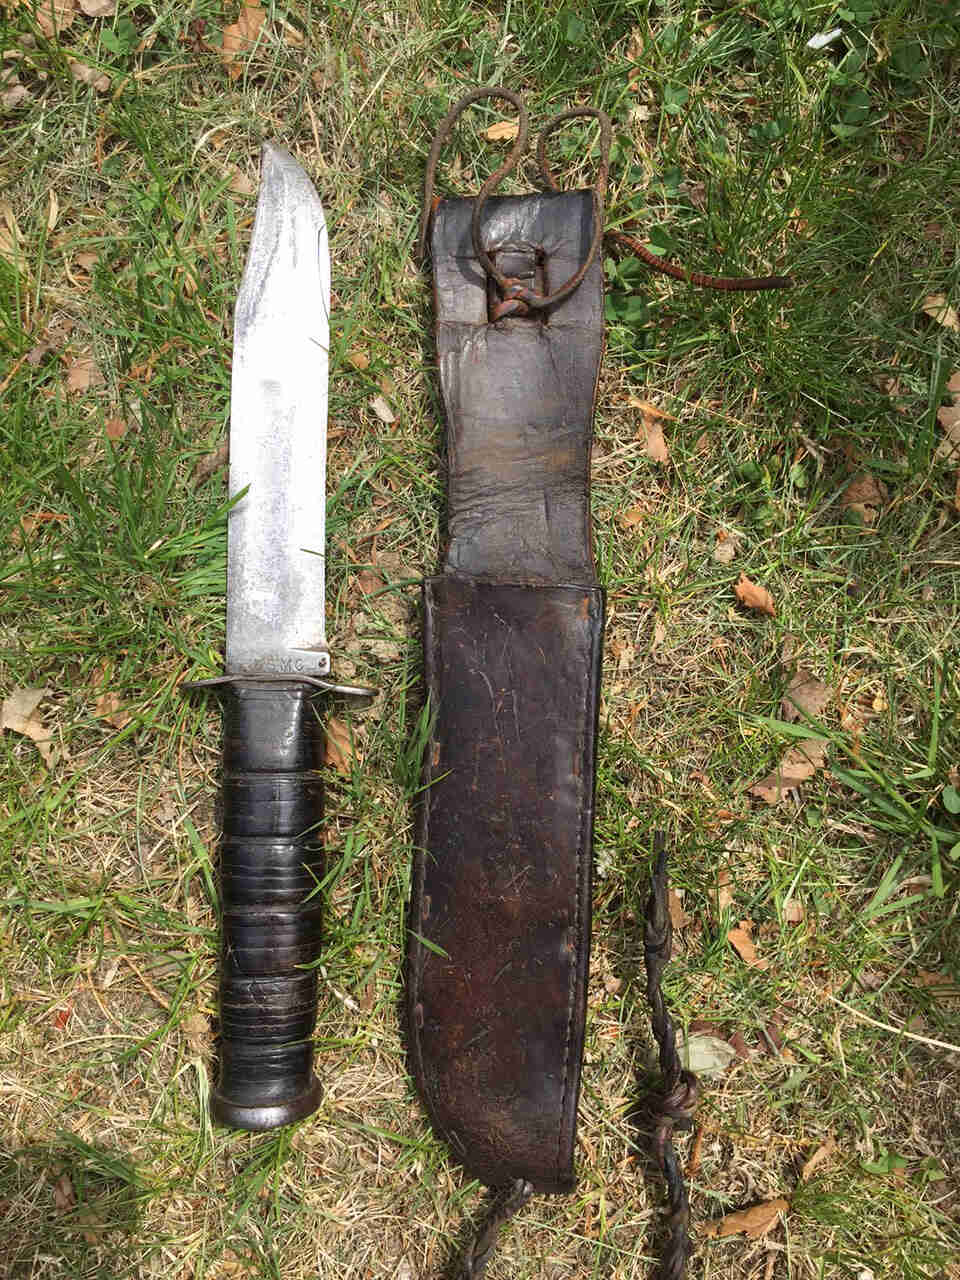 Downward view of a fixed blade knife and sheath, laying on grass